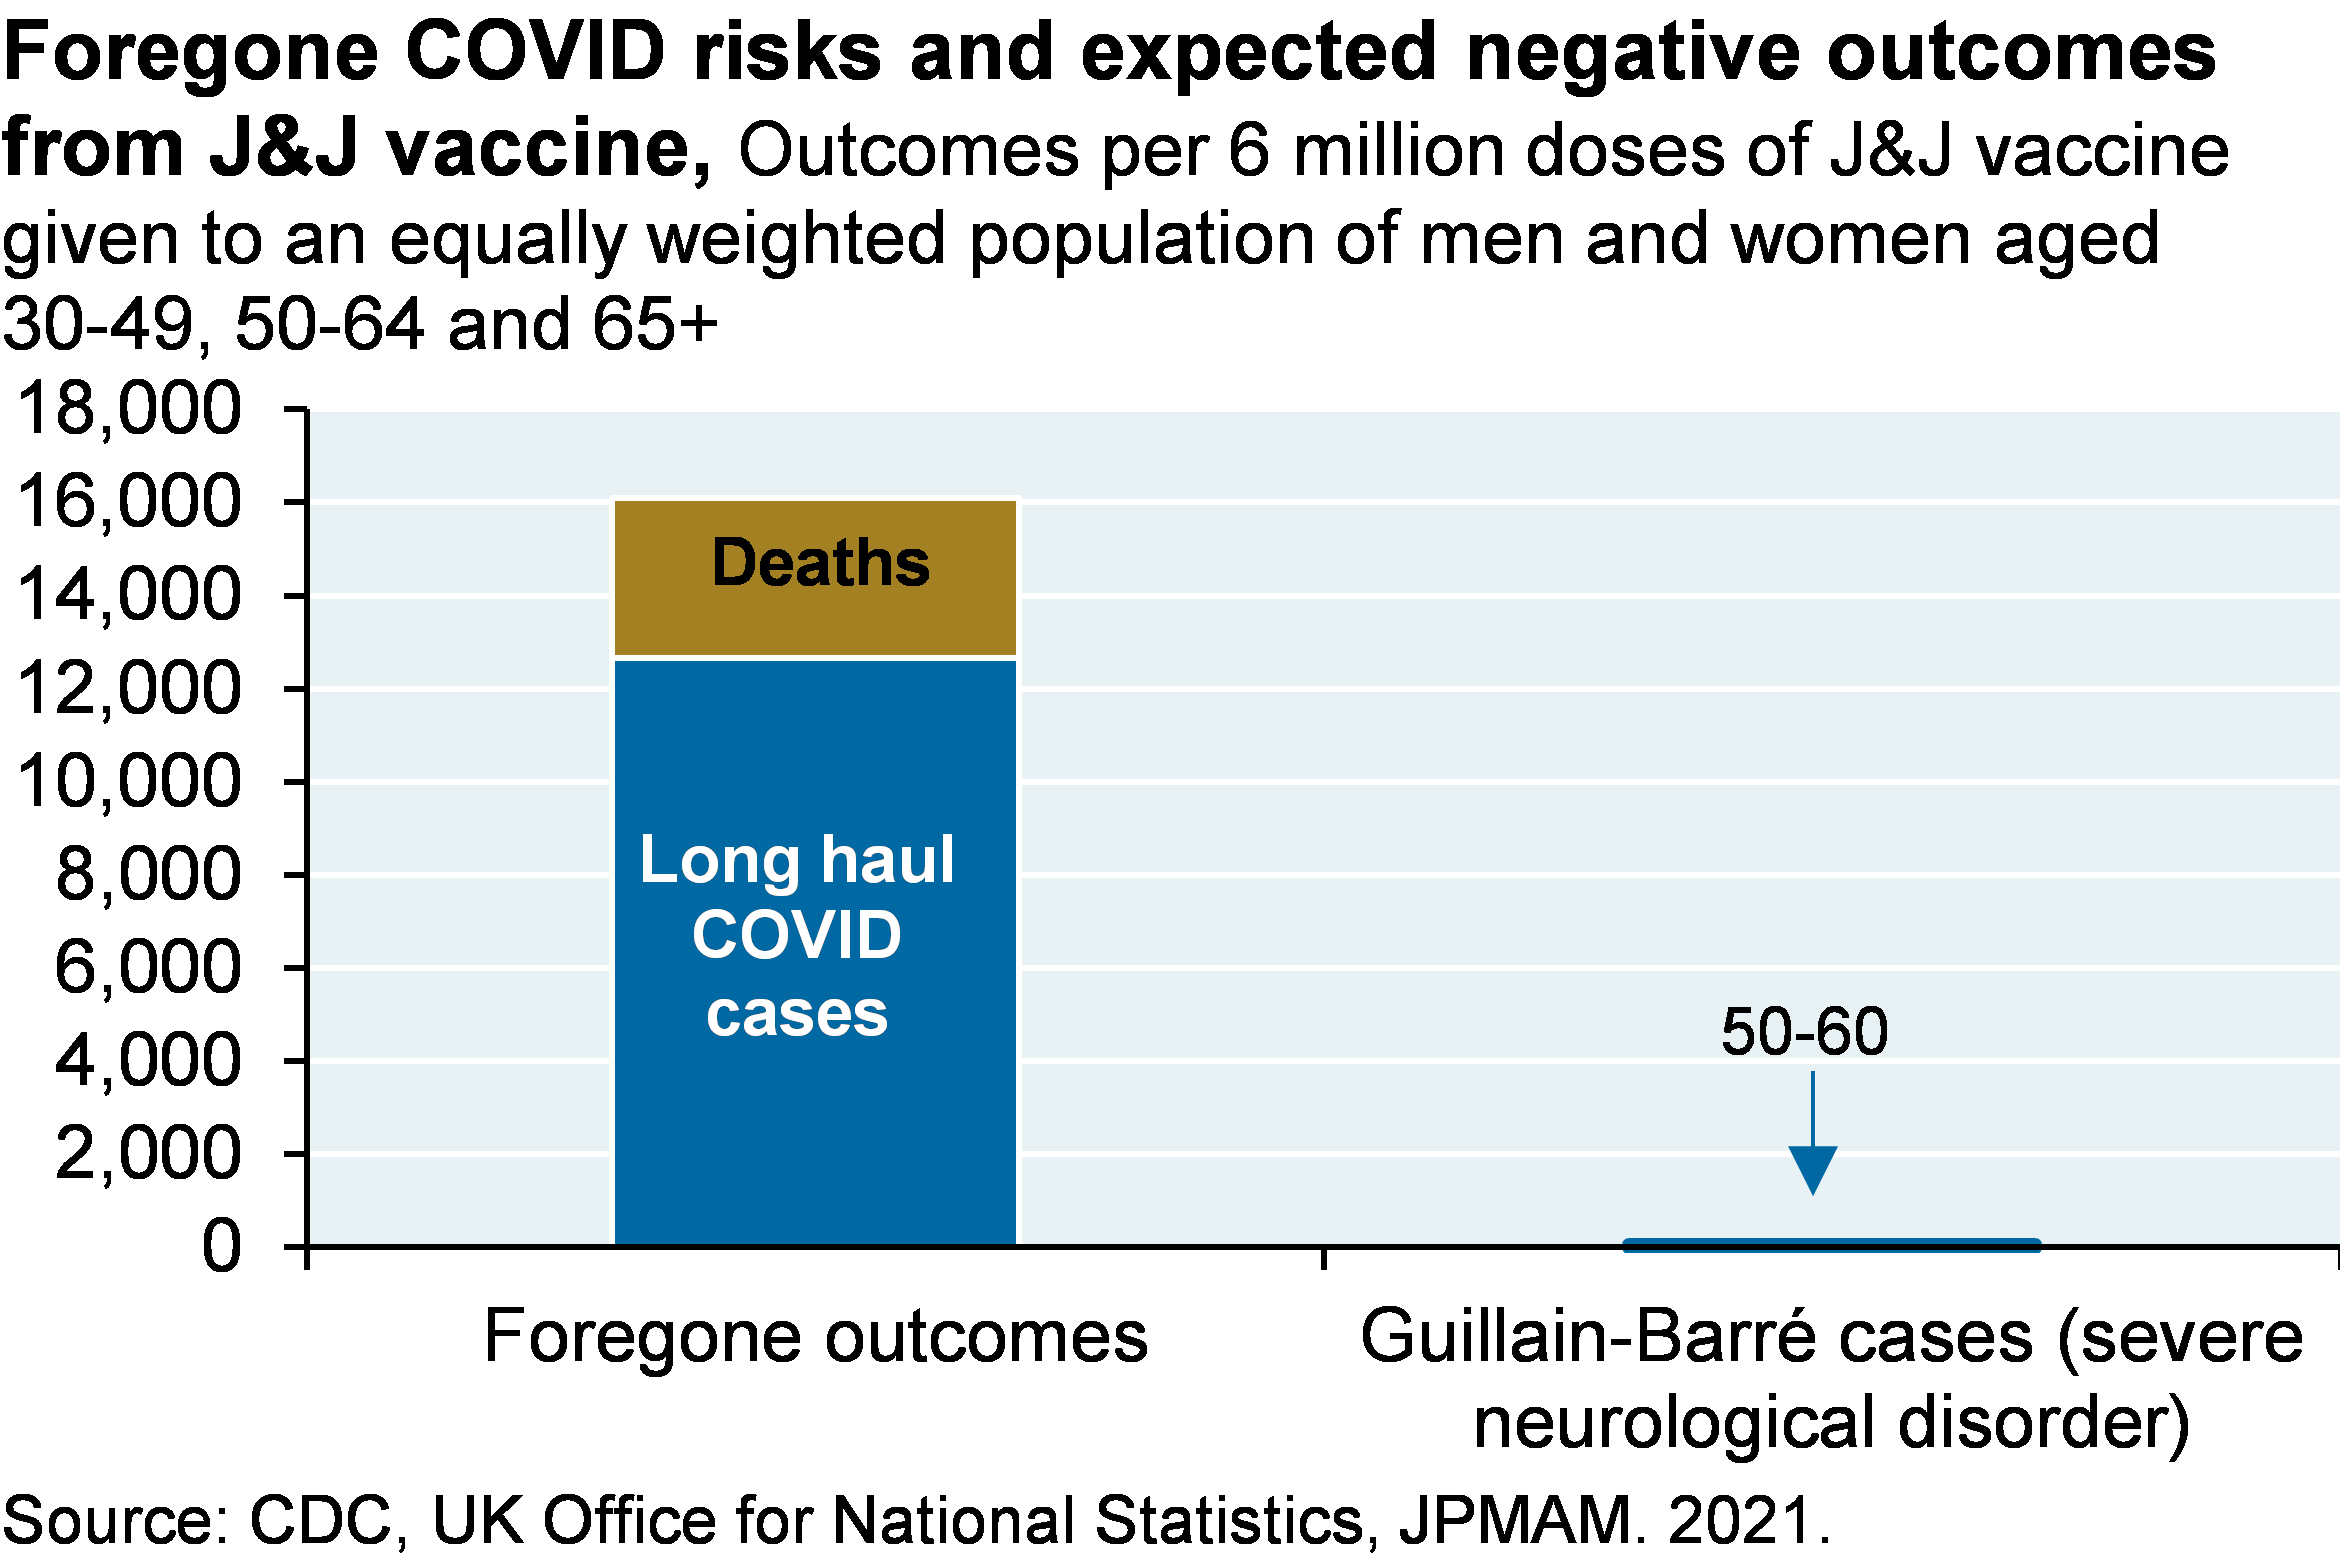 Bar chart shows foregone outcomes, including about 12,000 long haul COVID cases and about 4,000 deaths, per 6 million doses of J&J vaccines administered, compared to the 50-60 cases of Guillain-Barr√©, a severe neurological disorder.